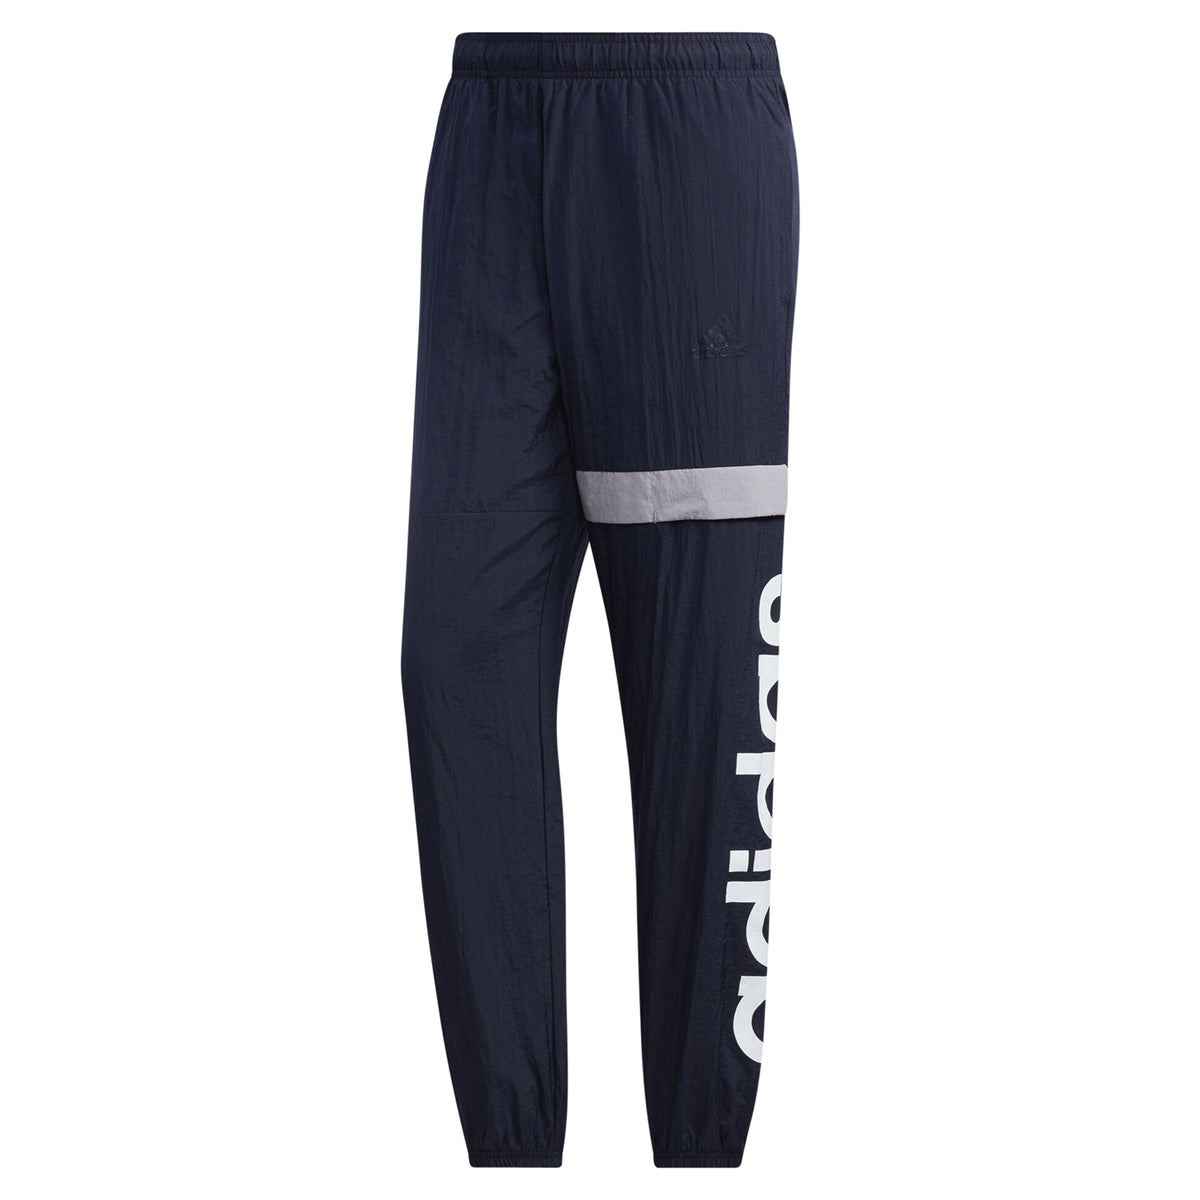 Adidas Men's New Authentic Track Pant GD5970